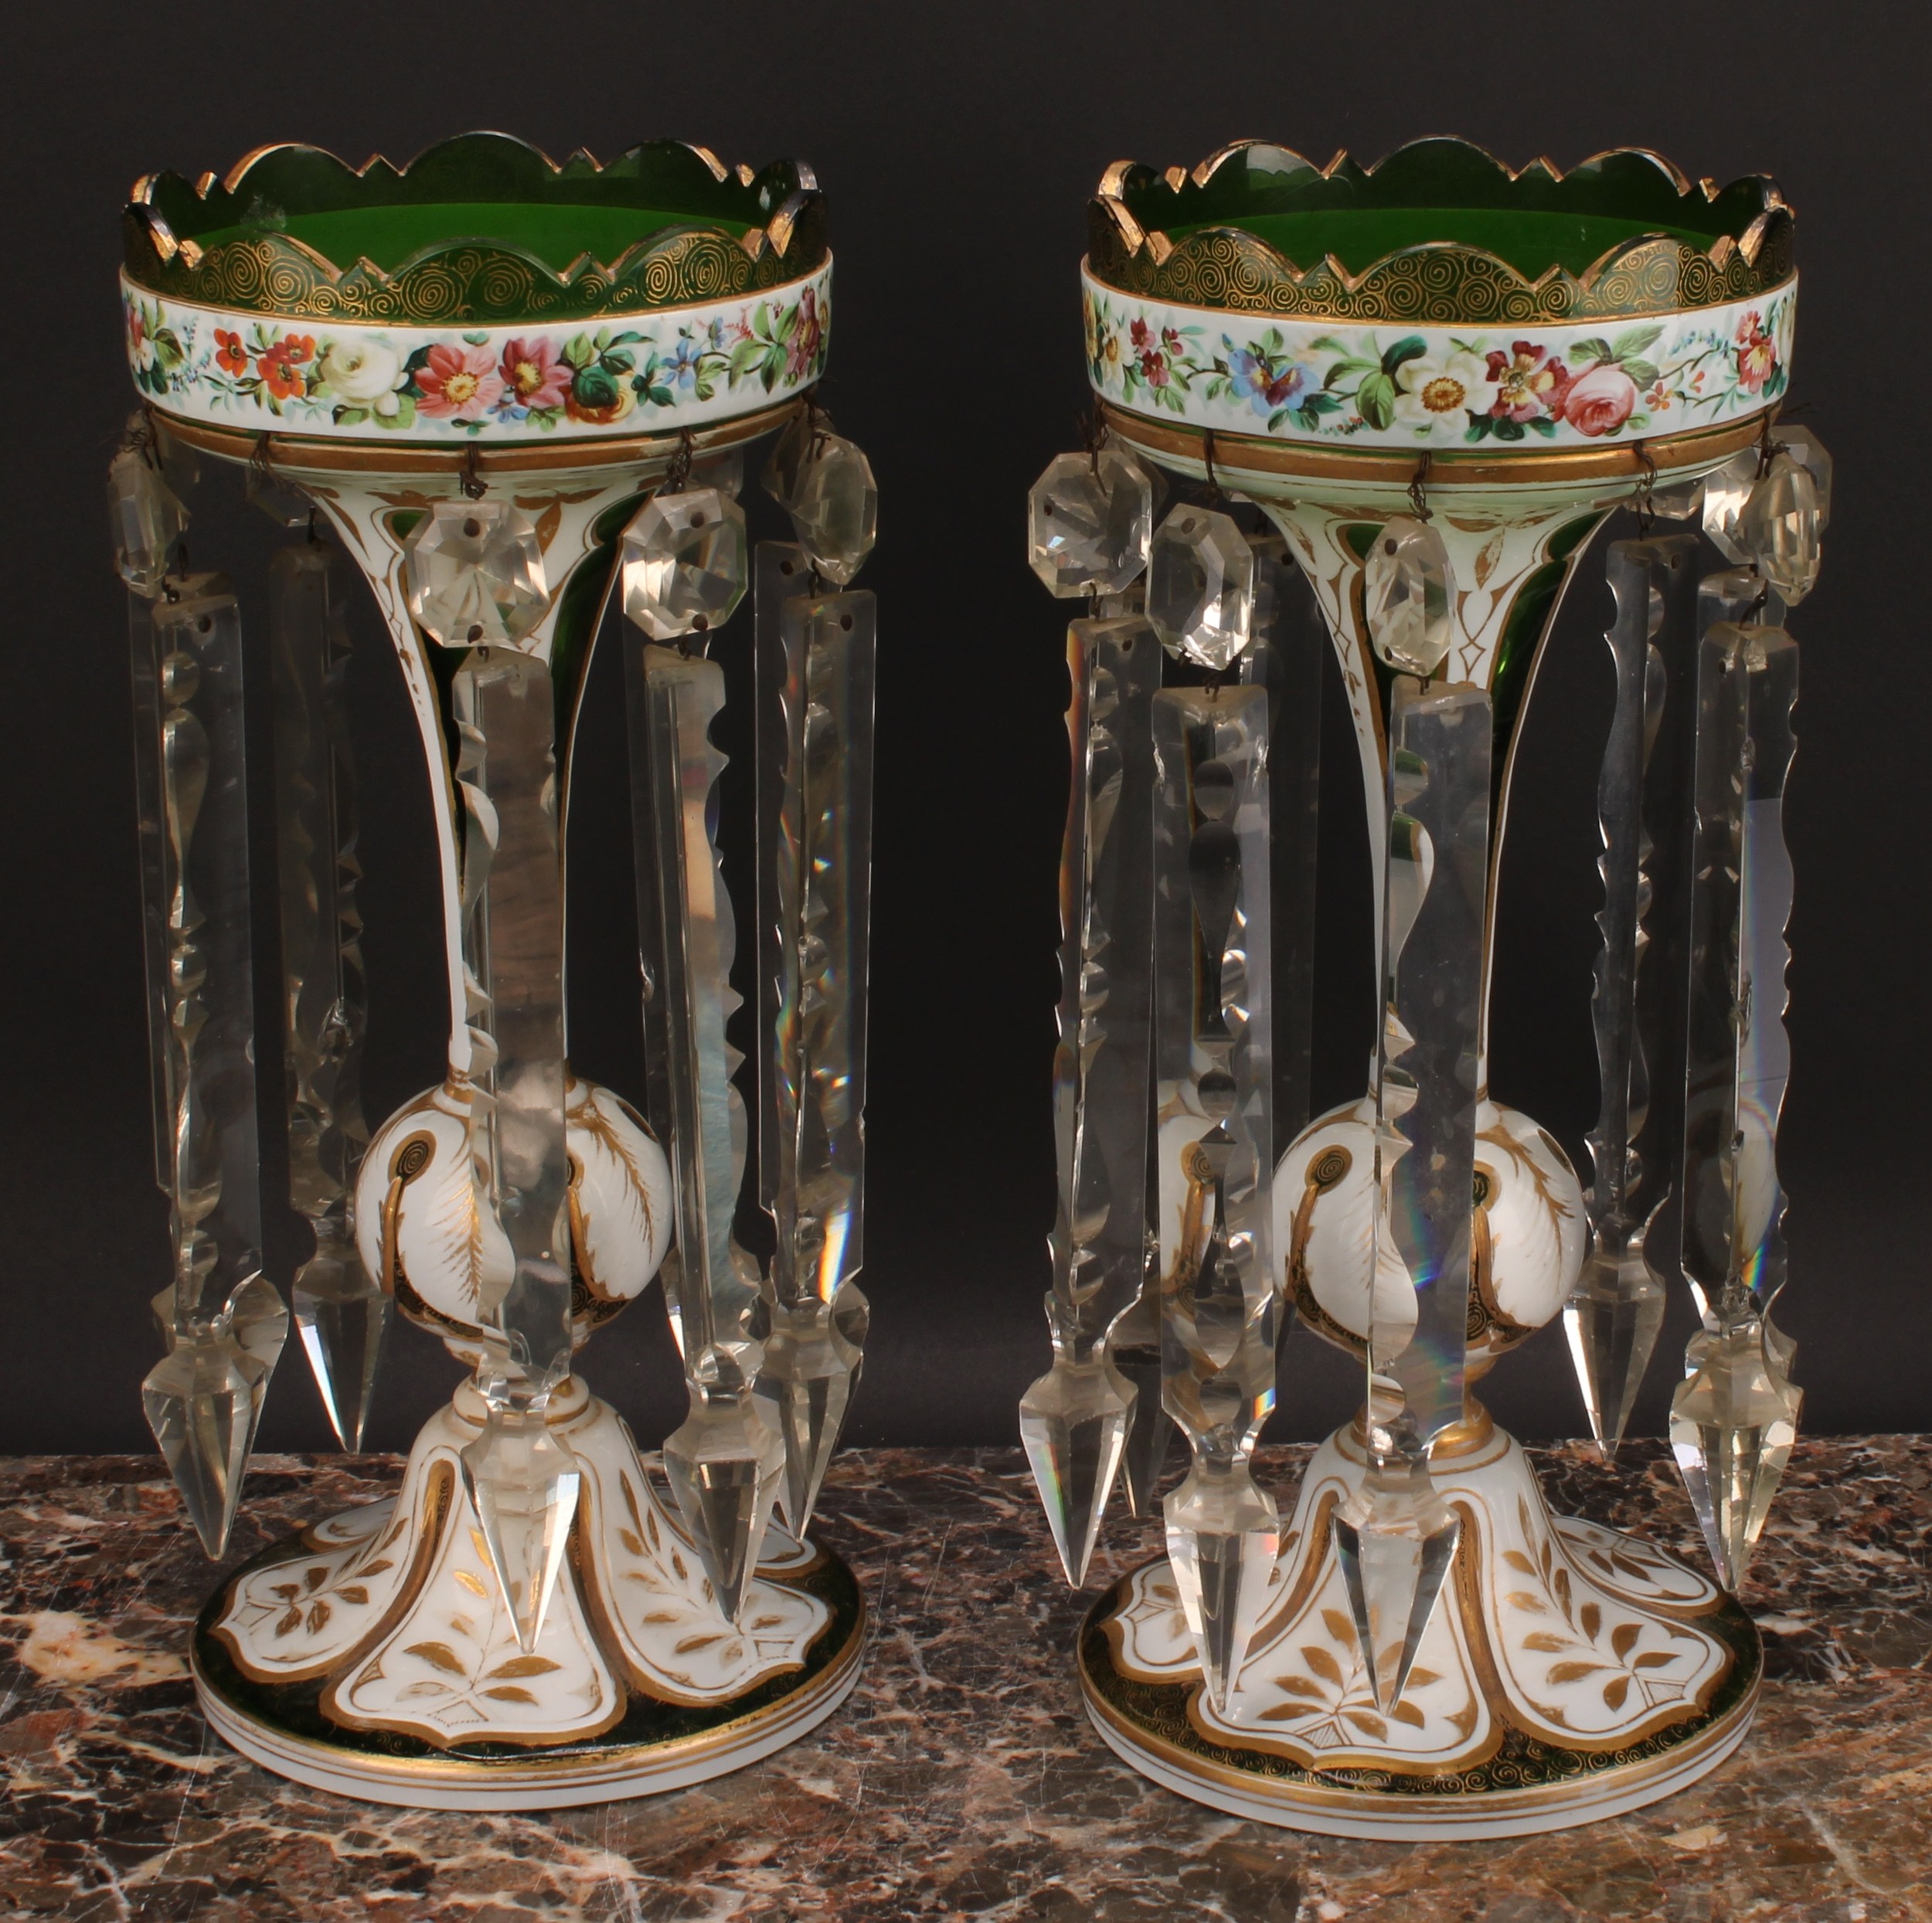 A pair of Bohemian overlaid glass mantel lustres, decorated in polychrome with flowers and picked - Image 3 of 3